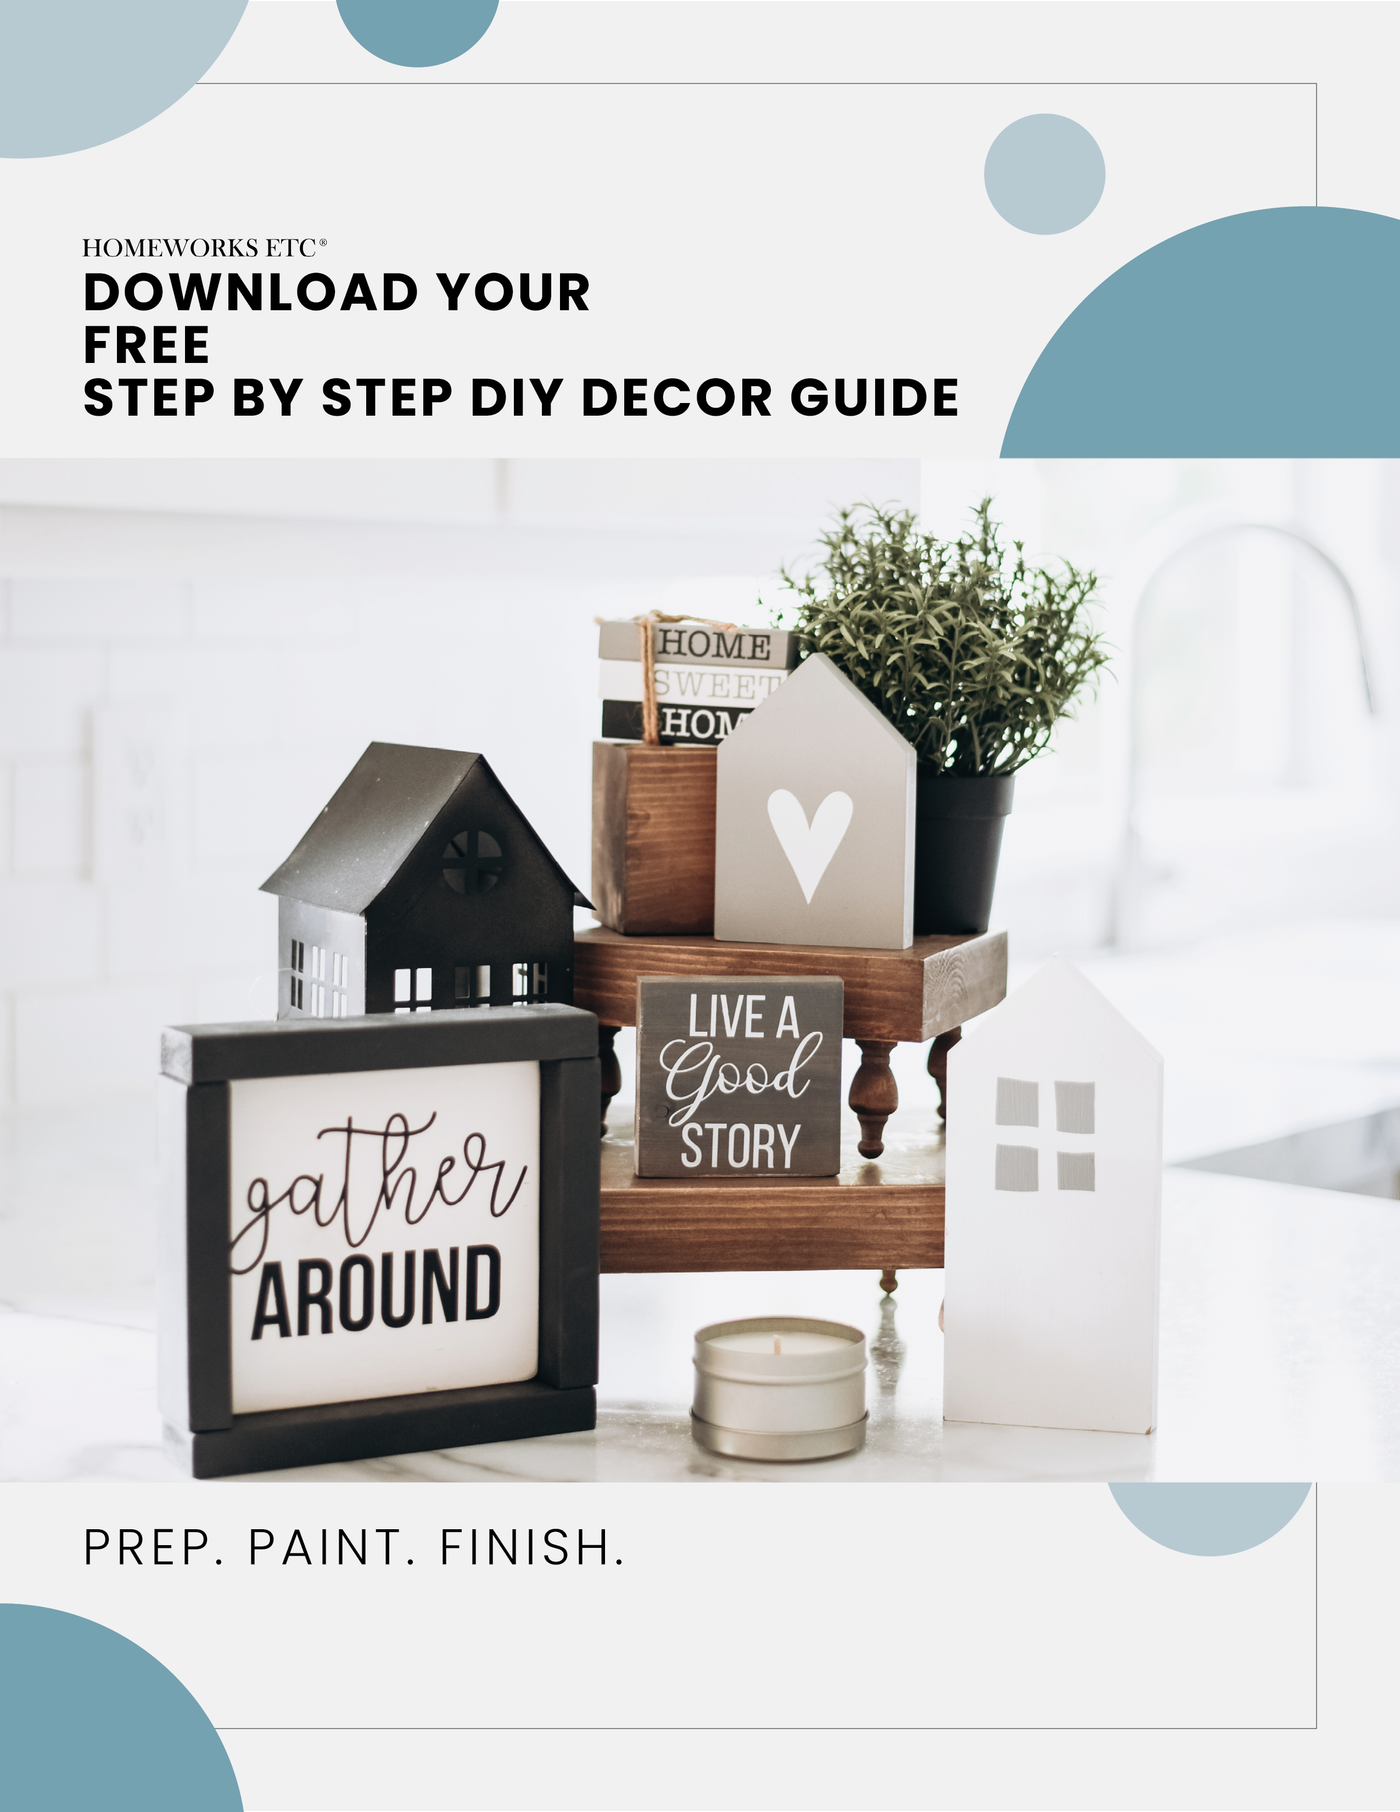 FREE Create Your Own Home Decor Guide {DIY Style}!